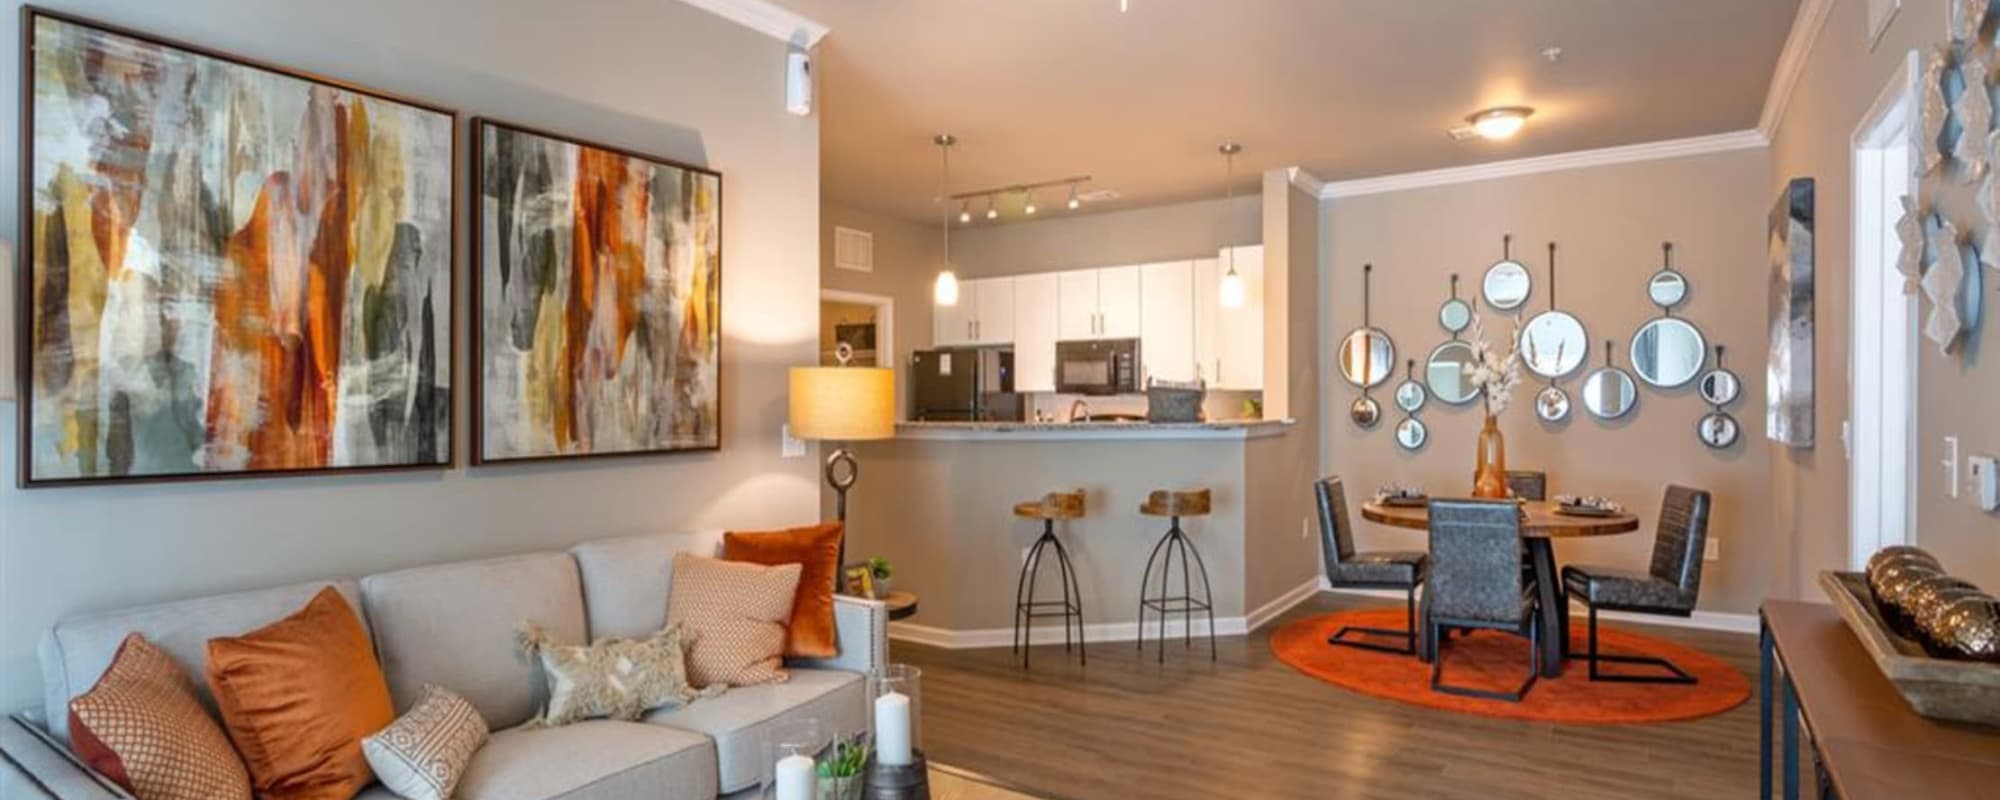 A furnished apartment living room and kitchen at Lullwater at Blair Stone in Tallahassee, Florida